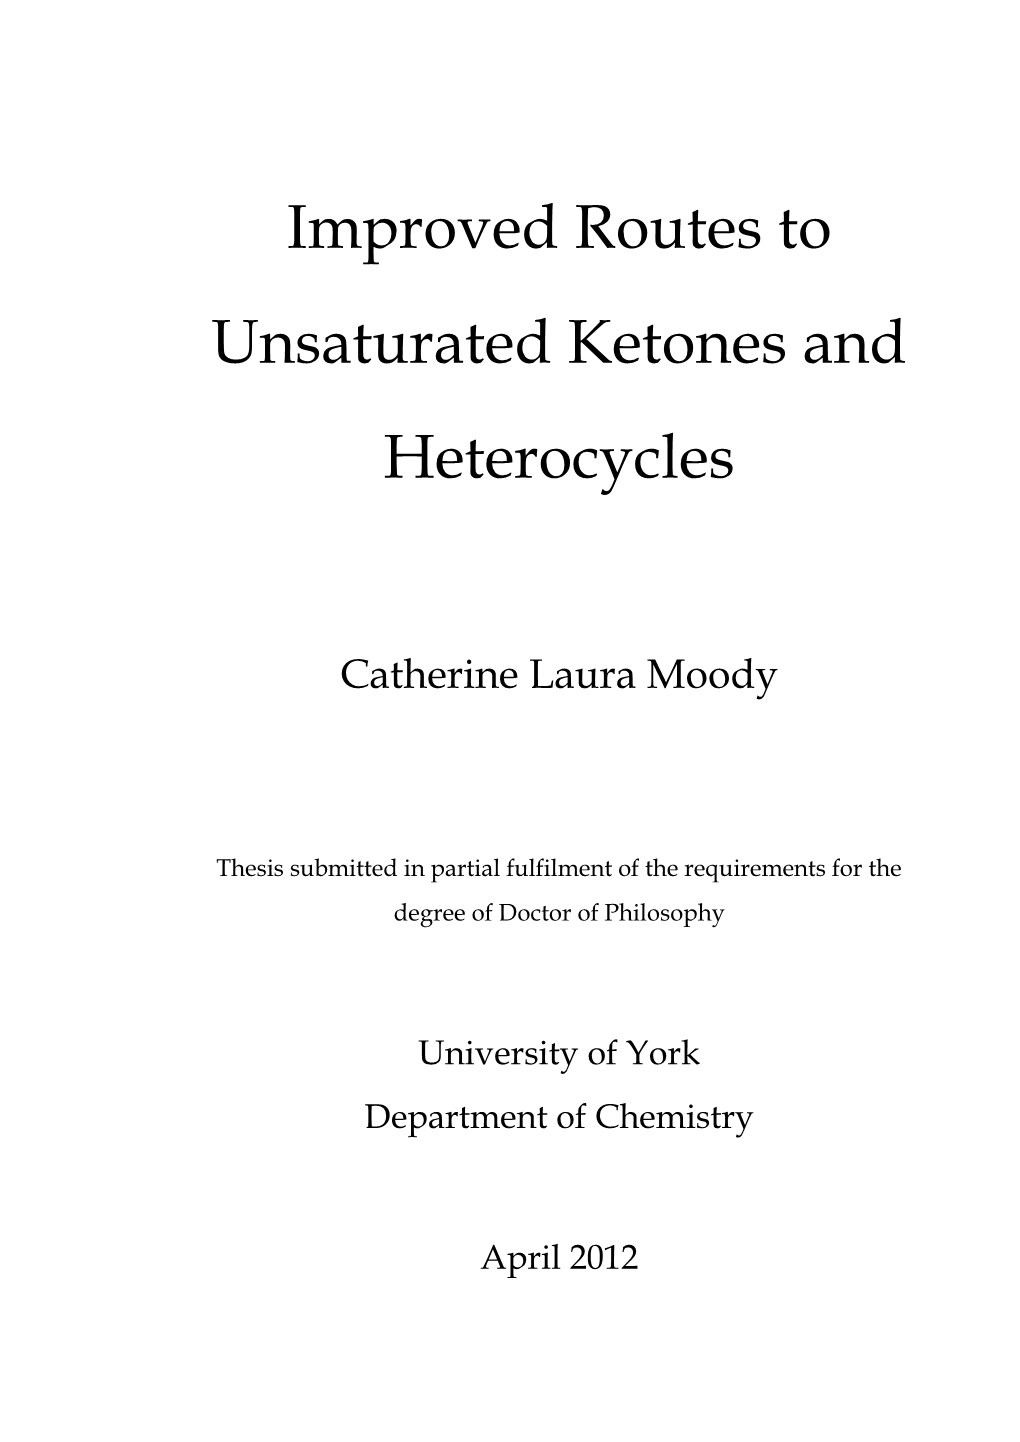 Improved Routes to Unsaturated Ketones and Heterocycles